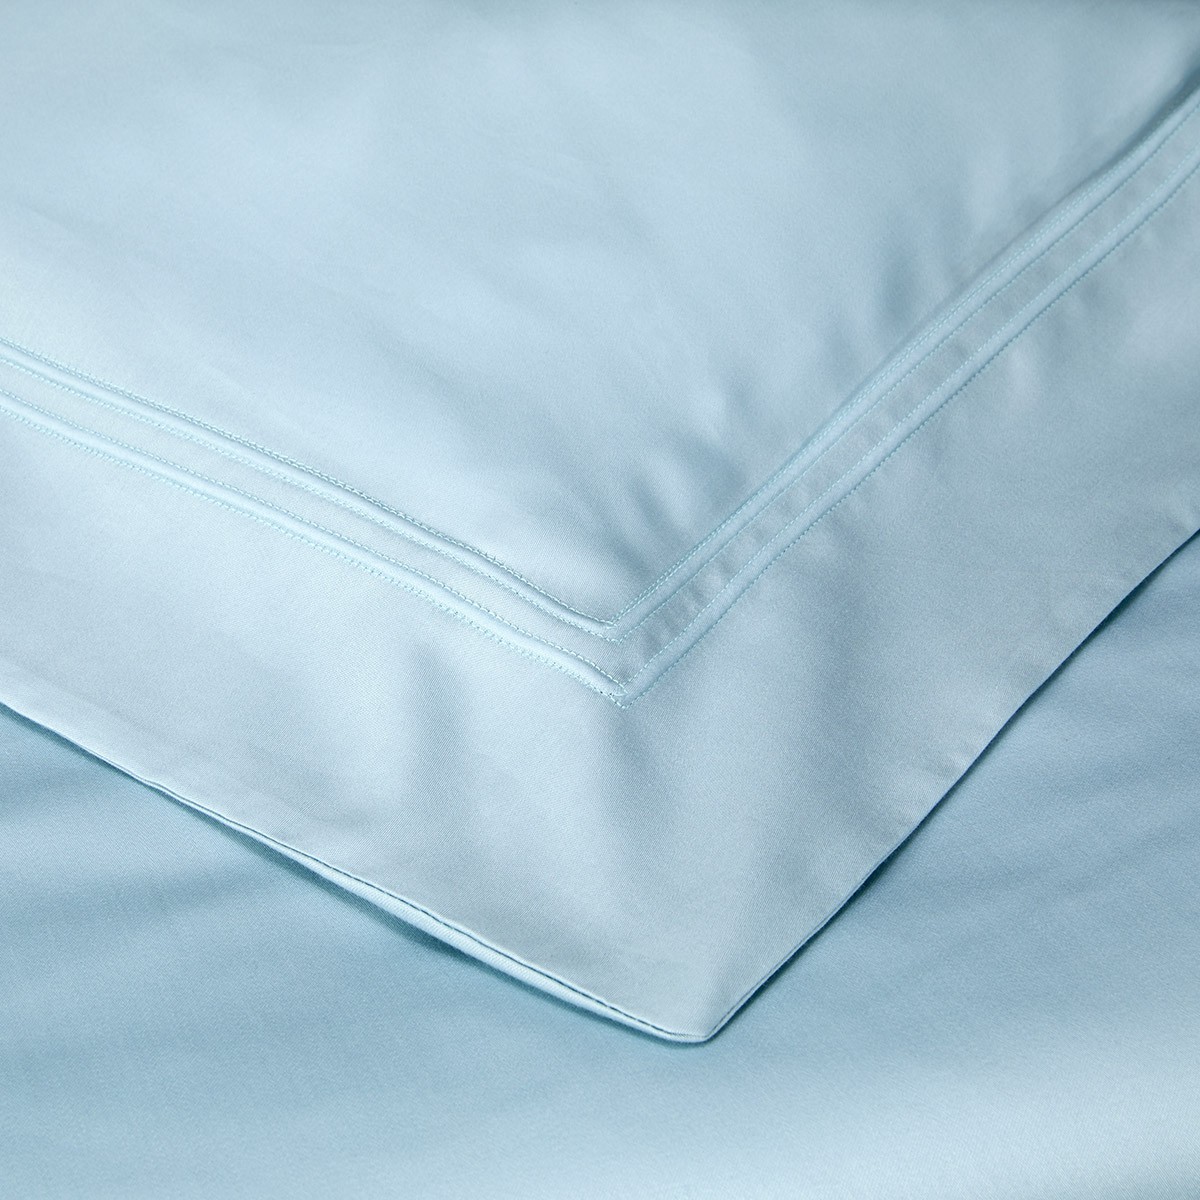 Bed Linen Triomphe 